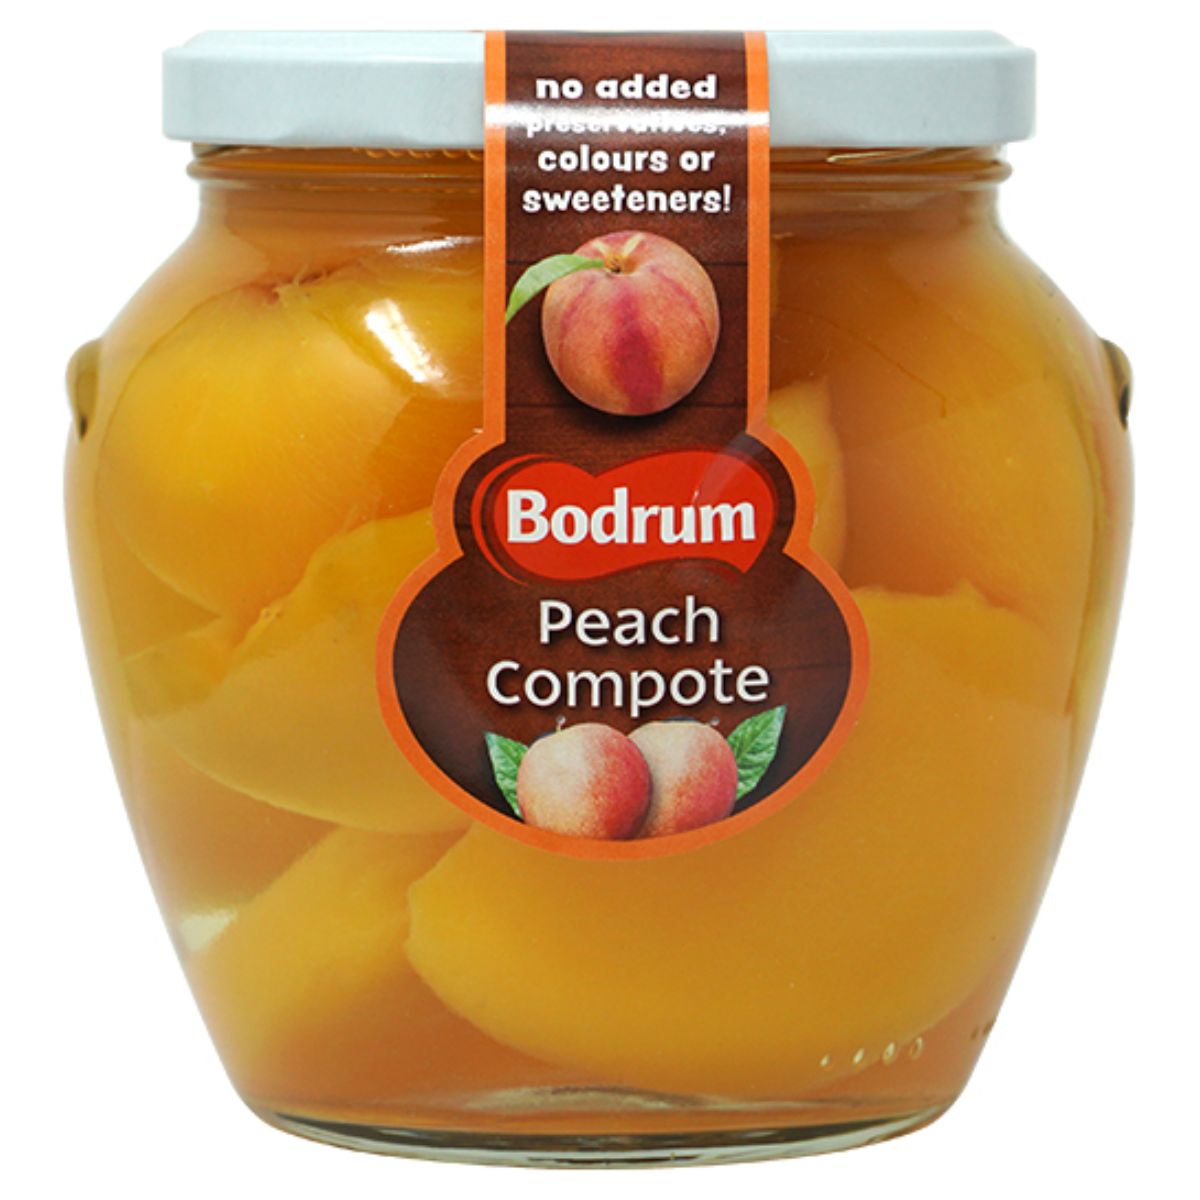 Budrum peach compotes in a jar on a white background.